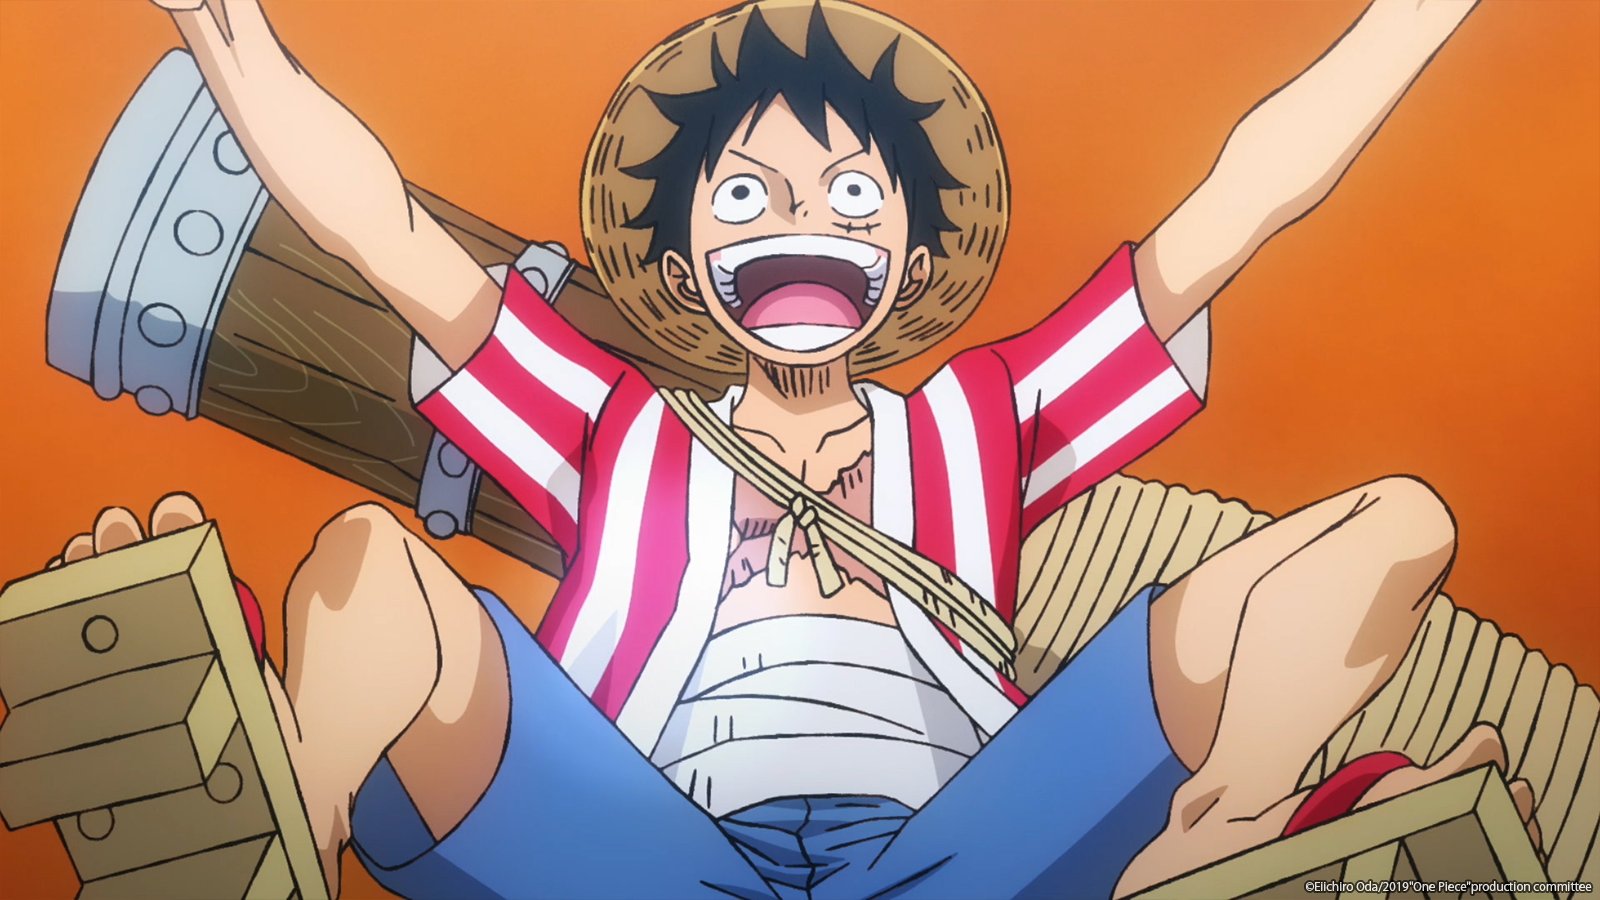 One Piece Episode 1070 Release Date & Time